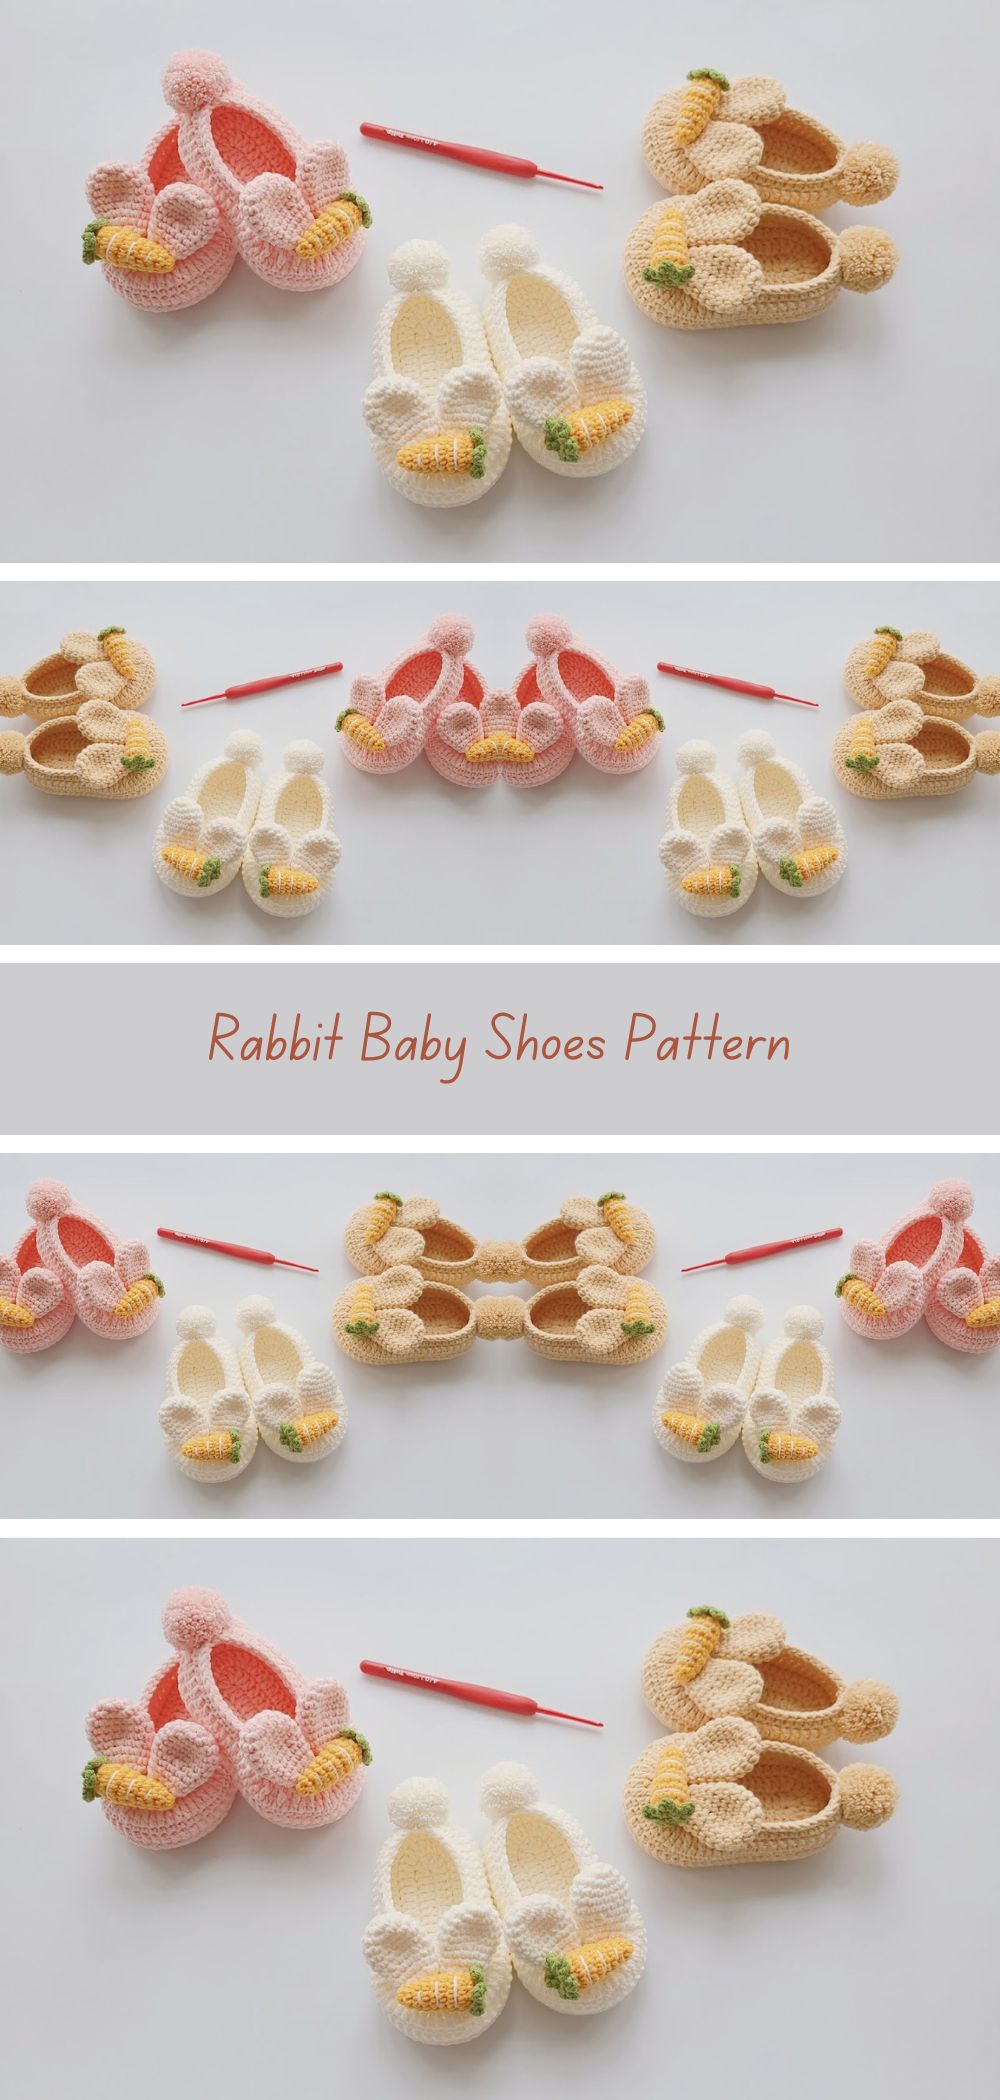 Rabbit Baby Shoes Crochet Pattern - Create adorable bunny-themed shoes for your little one with this charming crochet pattern